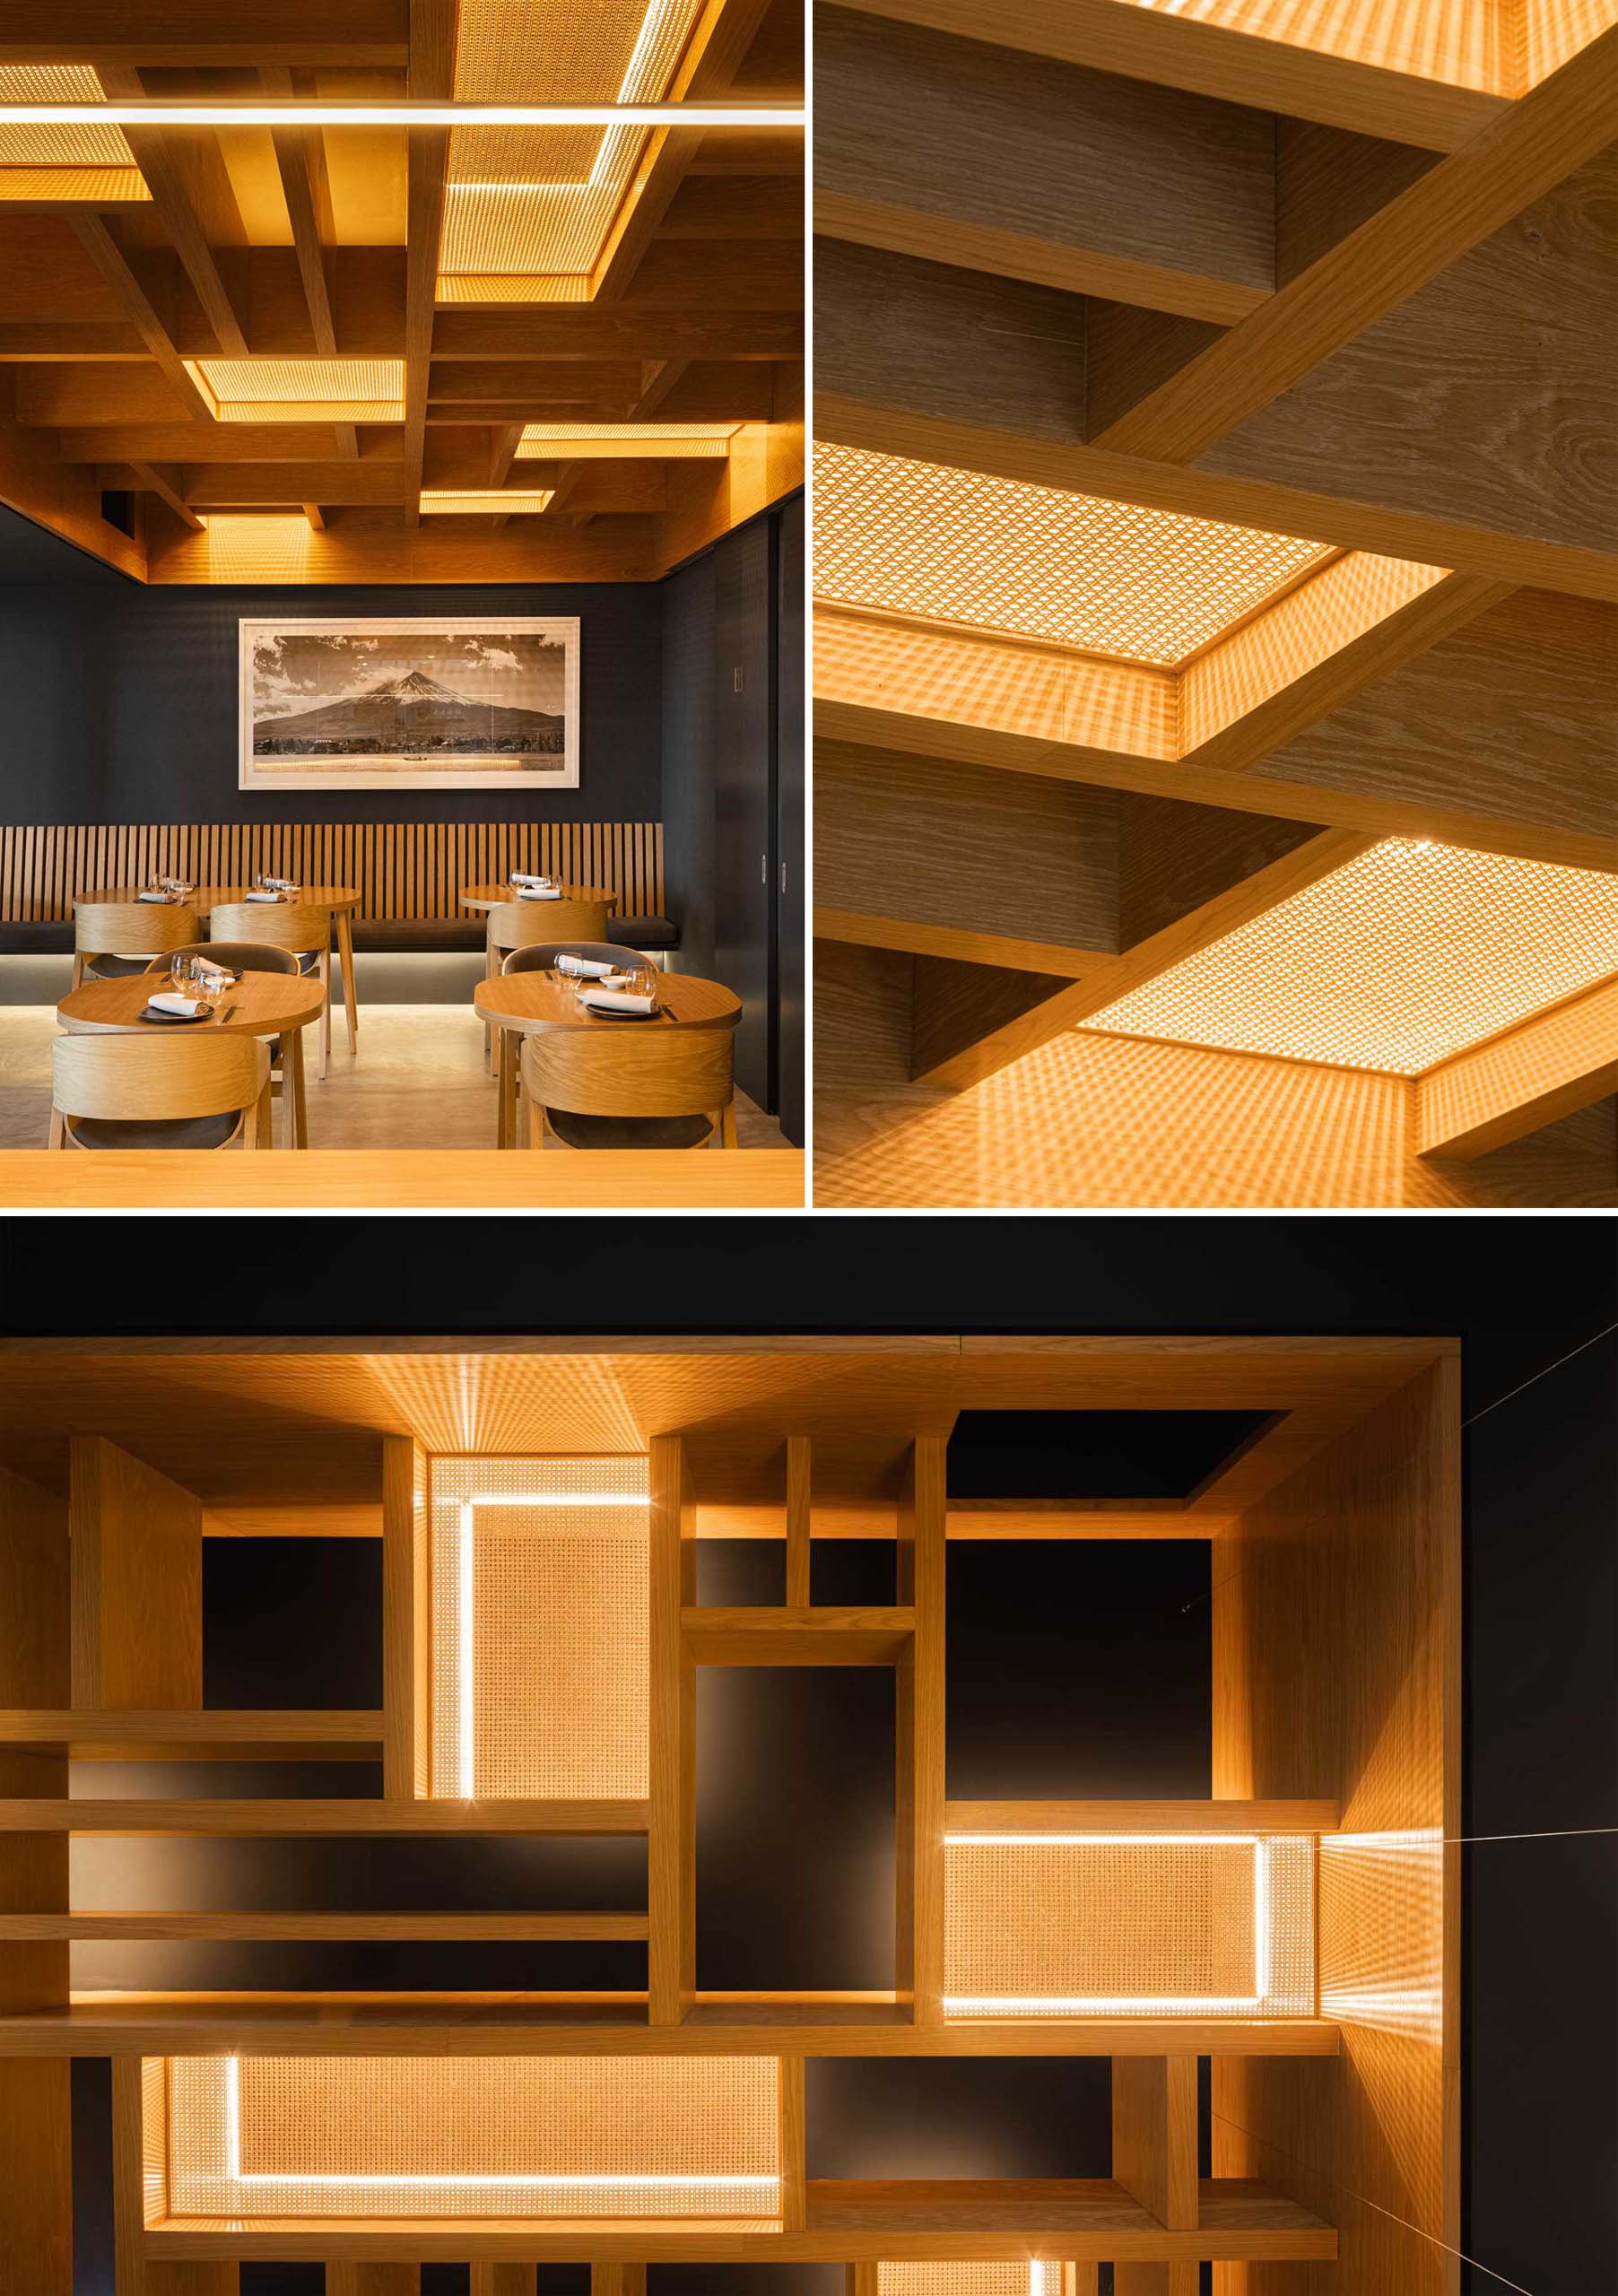 A modern restaurant ceiling has a grid design with straw panels and hidden LED lighting.